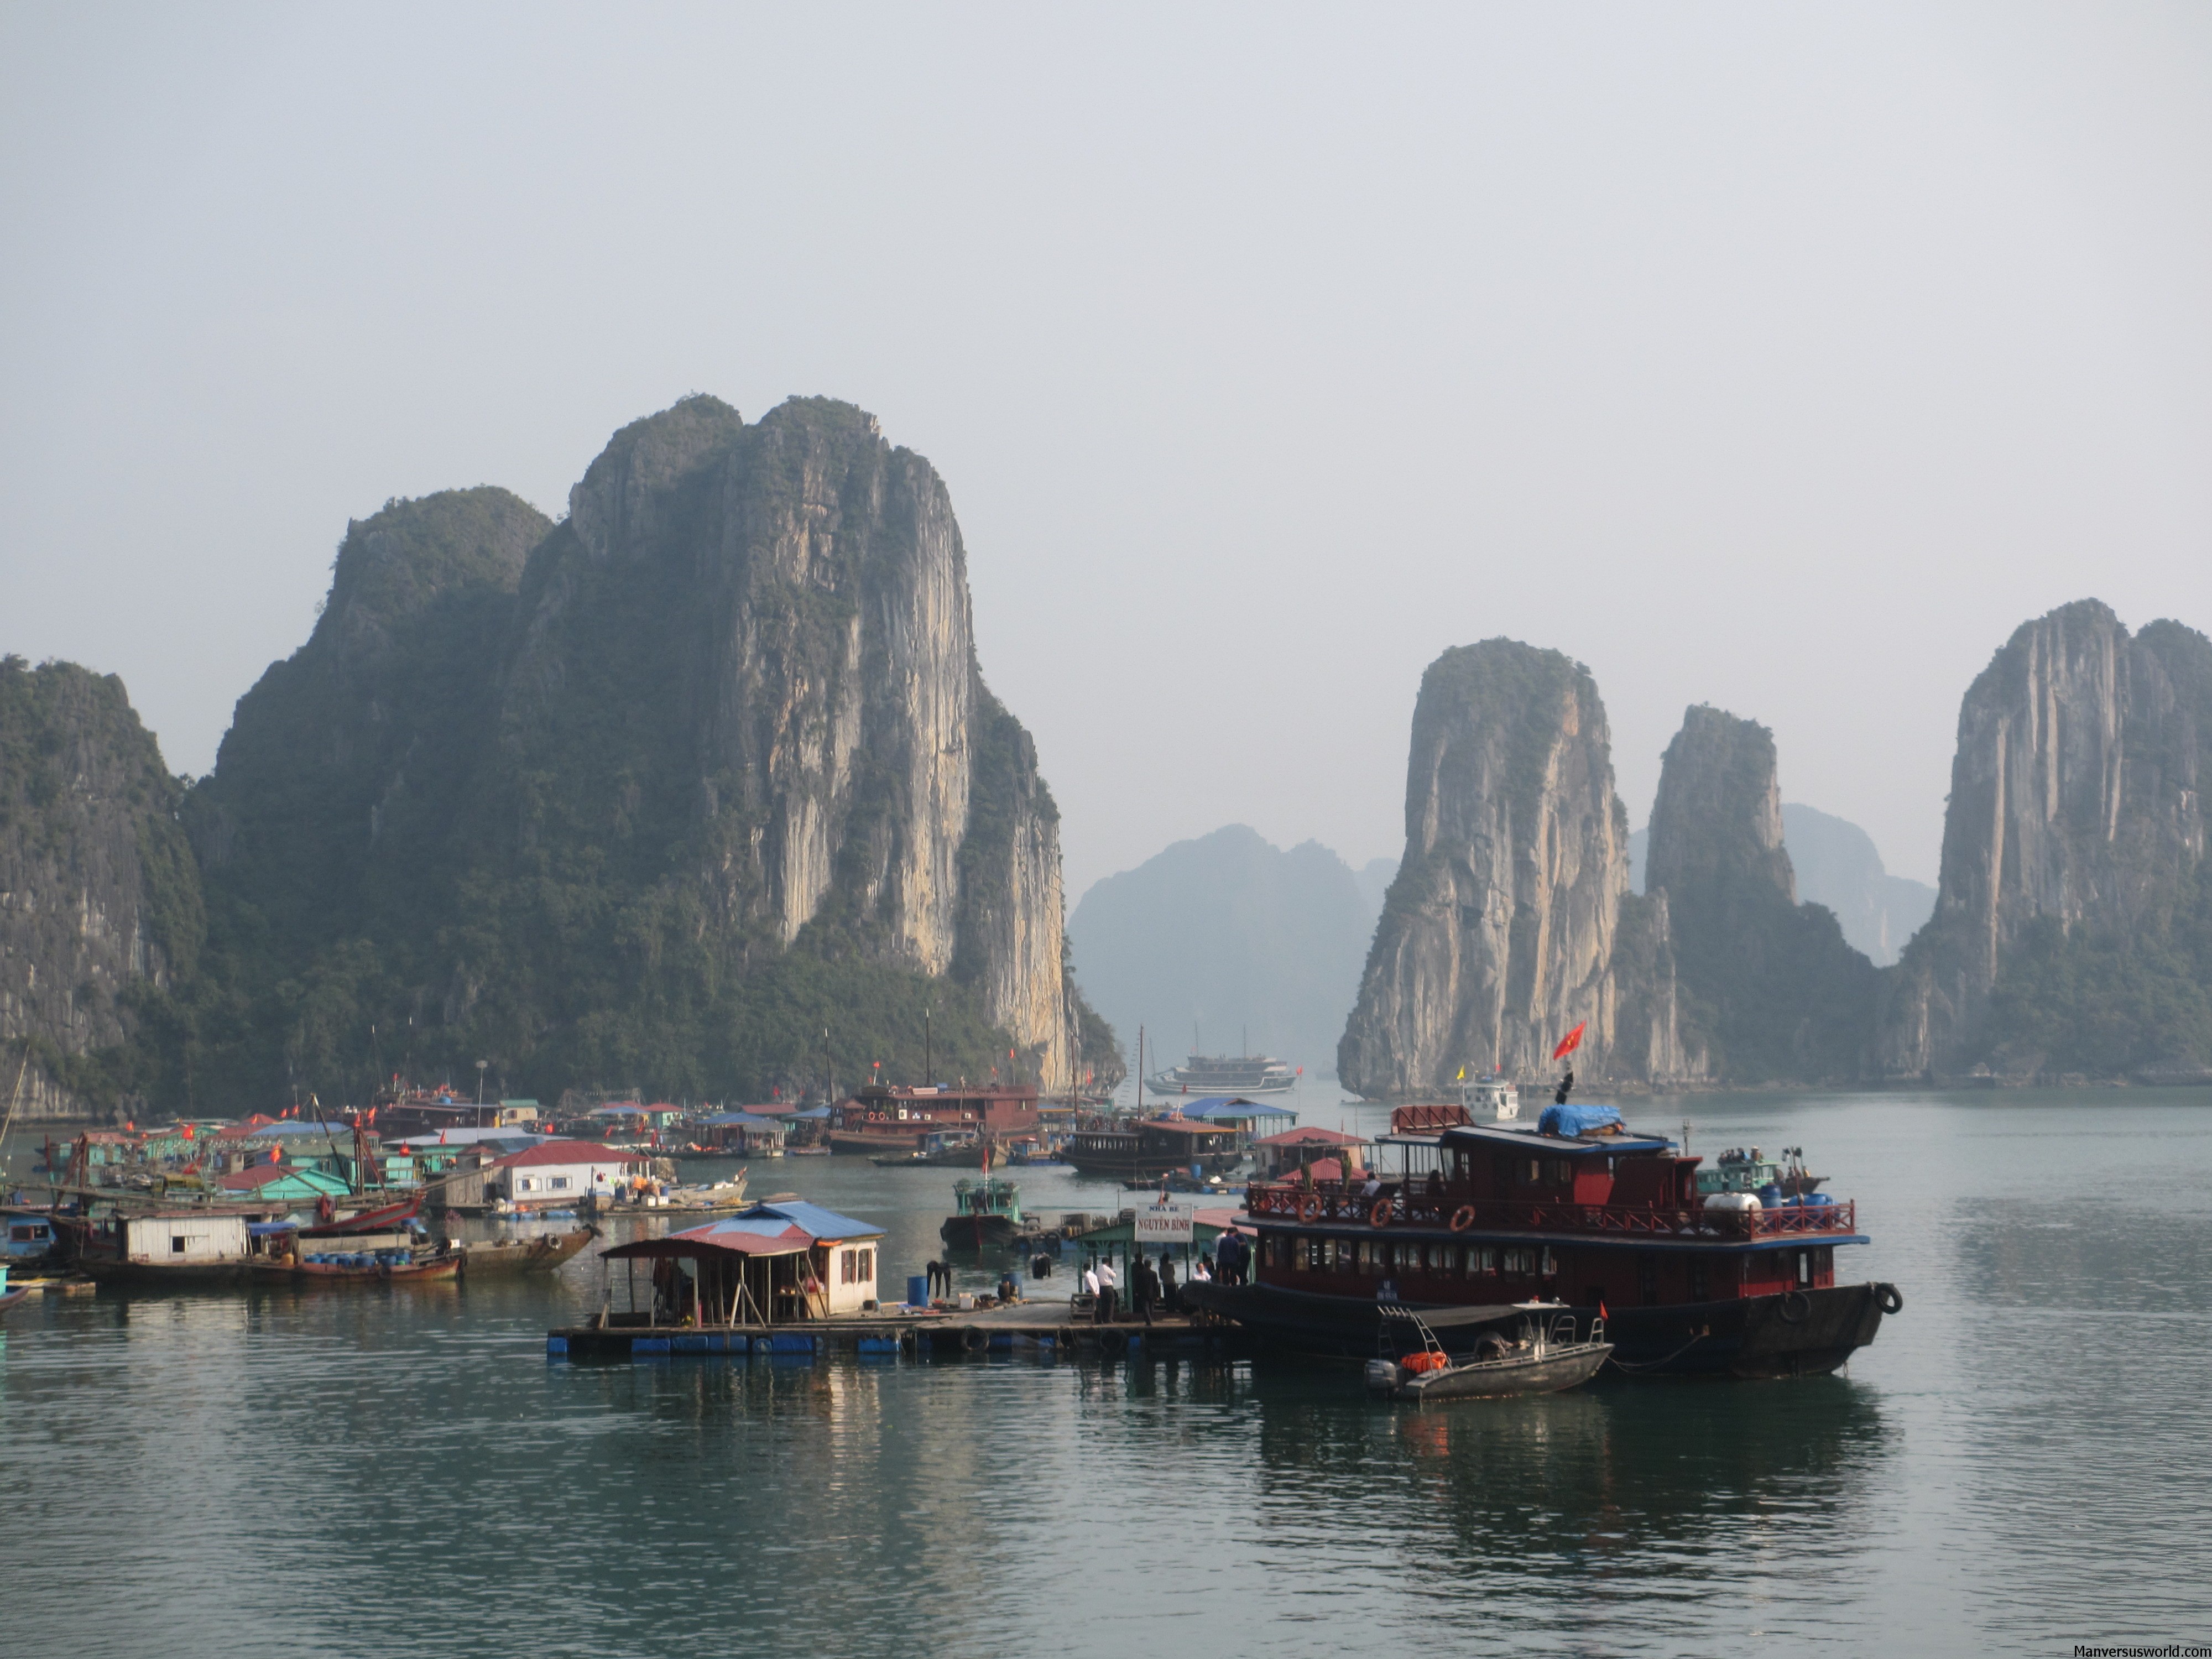 The ever mysterious and beautiful Halong Bay